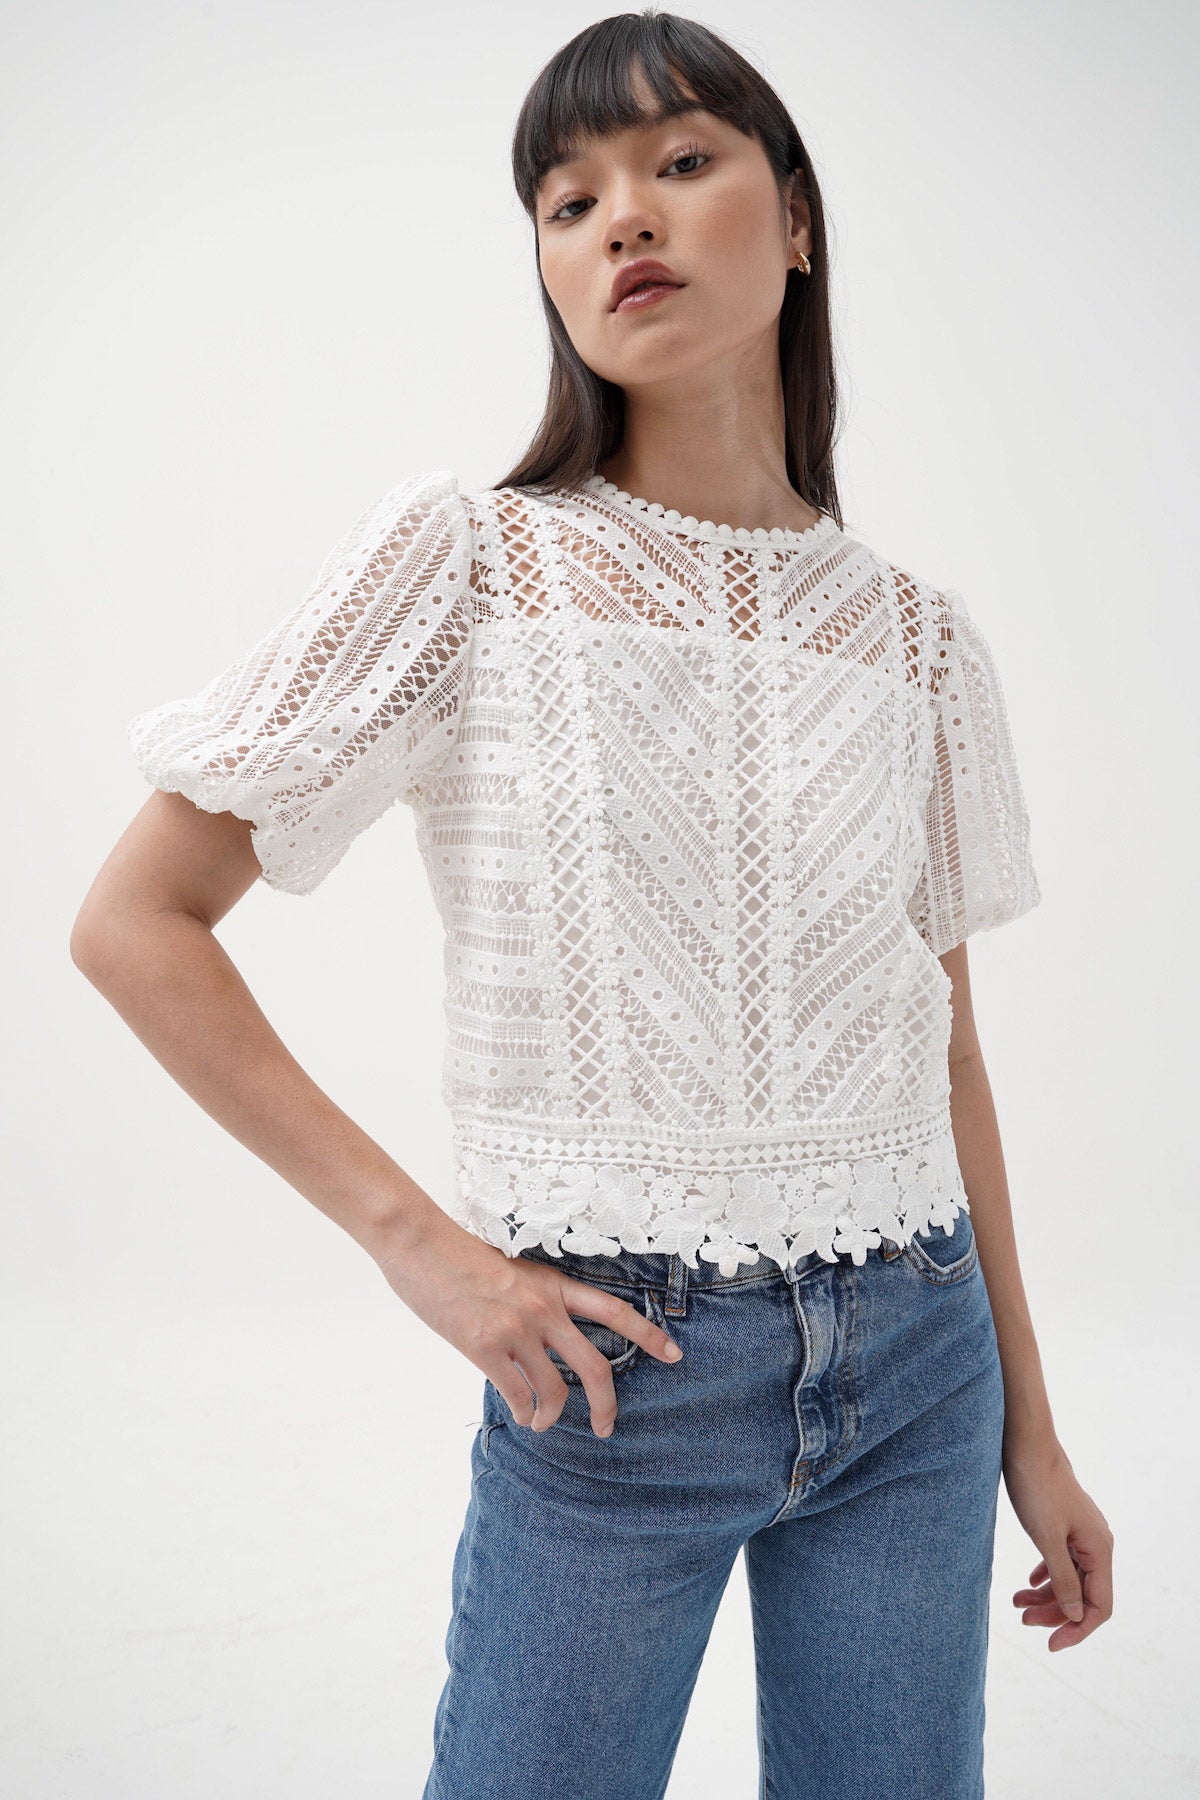 Mael Top In White (LAST PIECE)